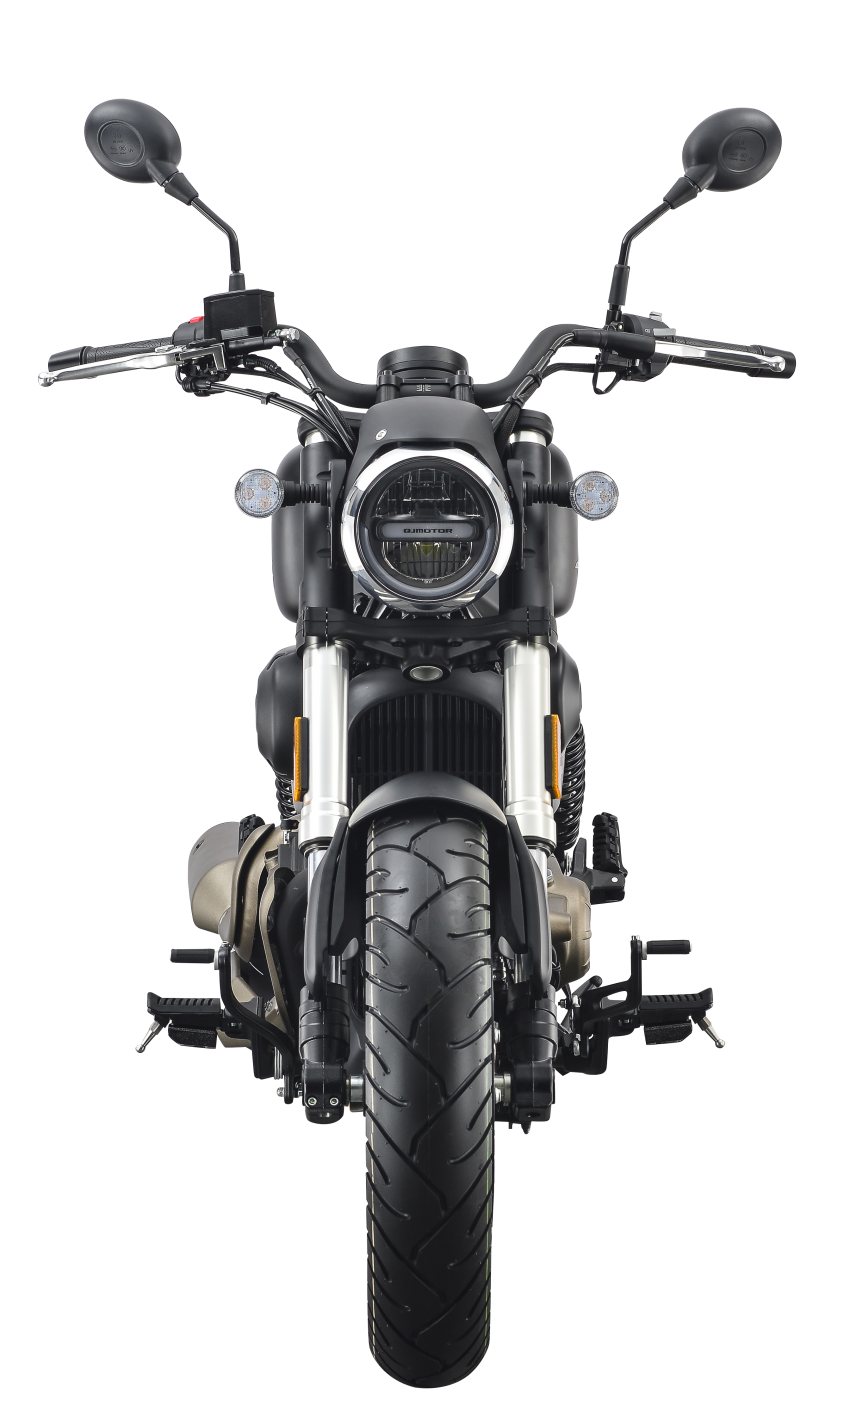 2022 QJMotor SRV250, SRK250 and SRK250RR now in Malaysia – pricing starts from RM16,888 1532563